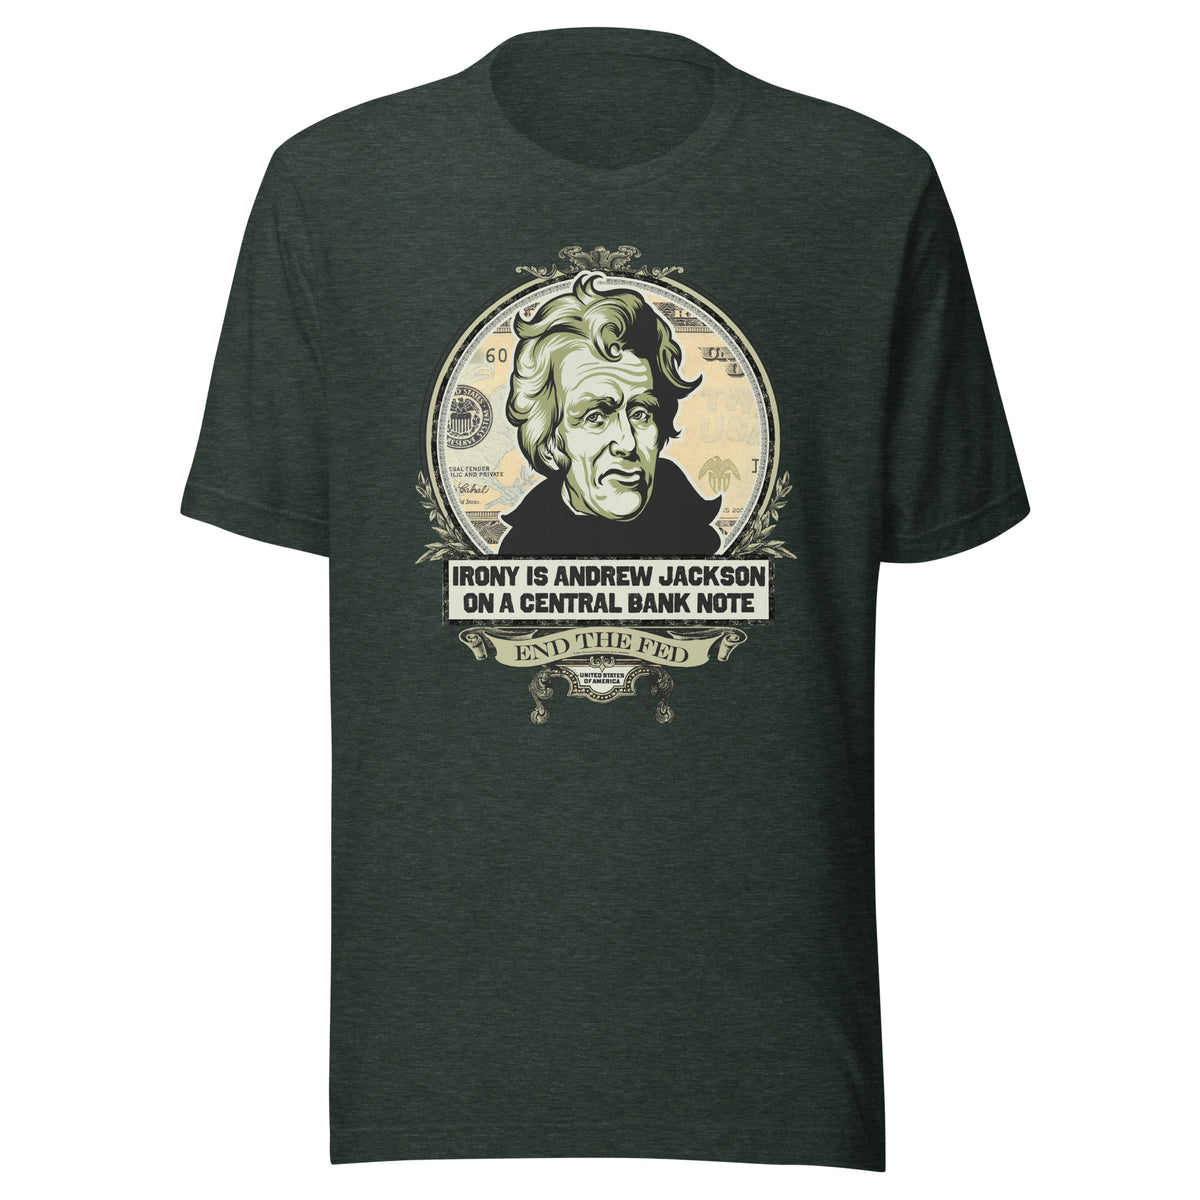 Irony is Andrew Jackson On A Central Bank Note Shirt - Liberty Maniacs